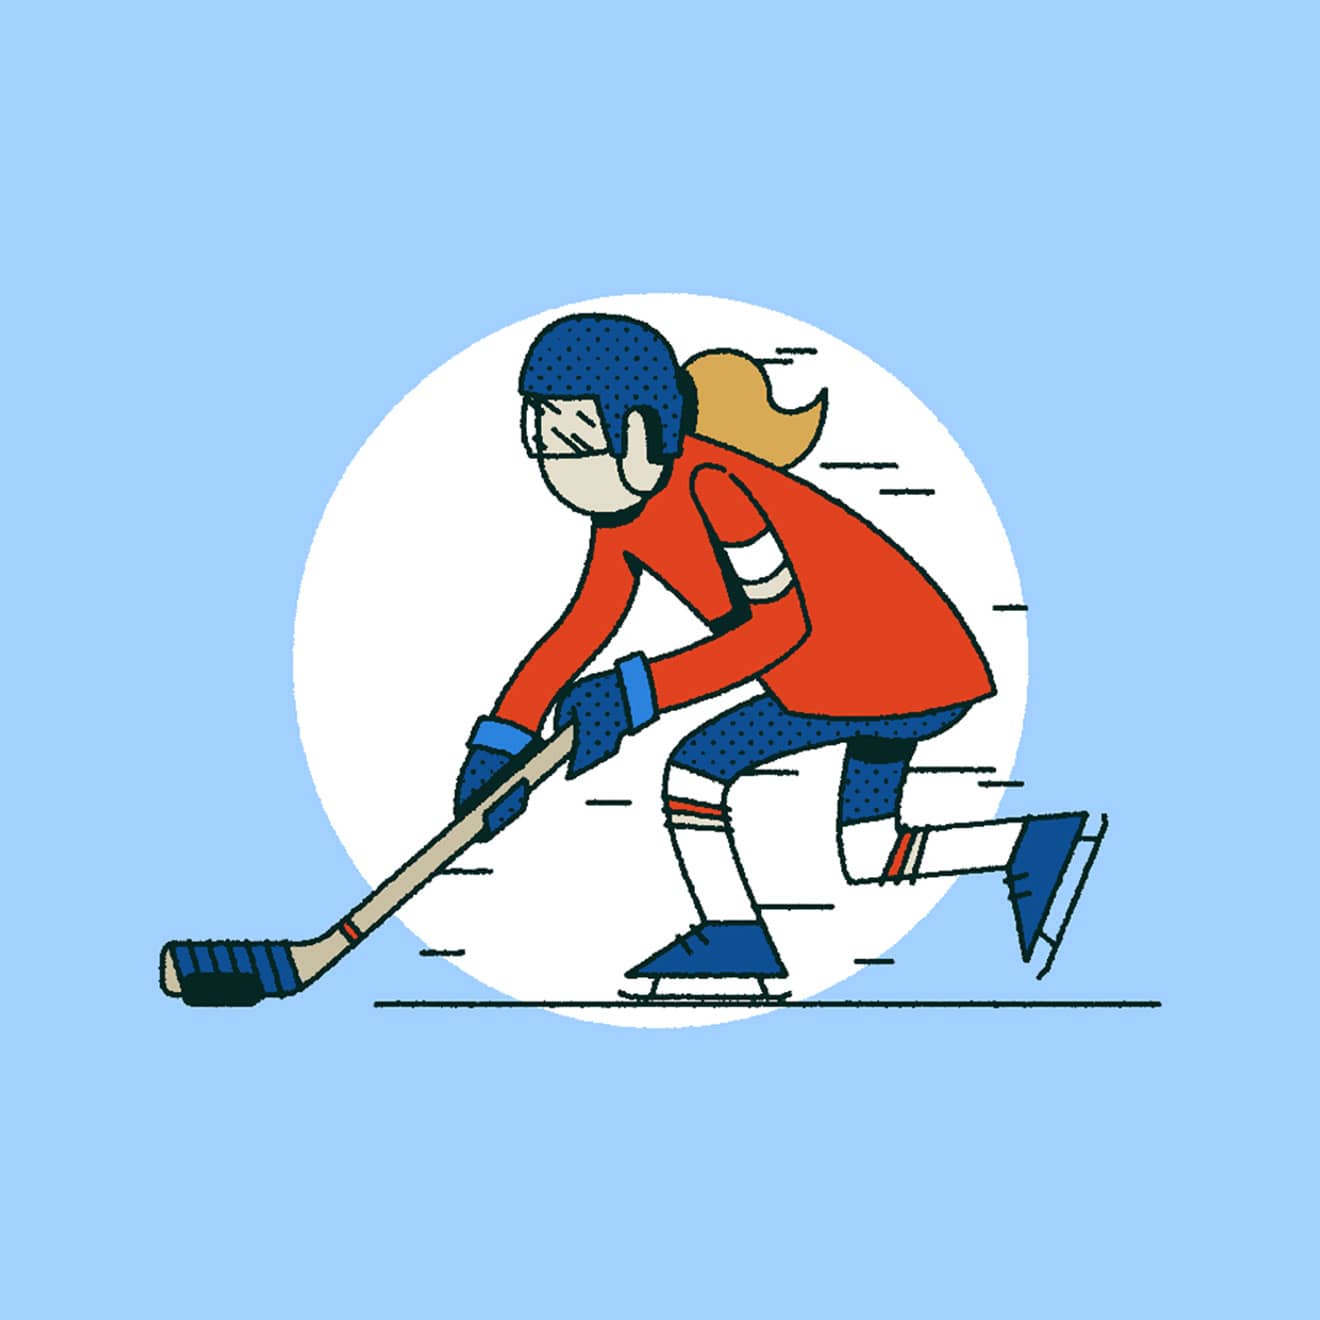 Blue, Red, White & Beige illustration of a woman playing hockey